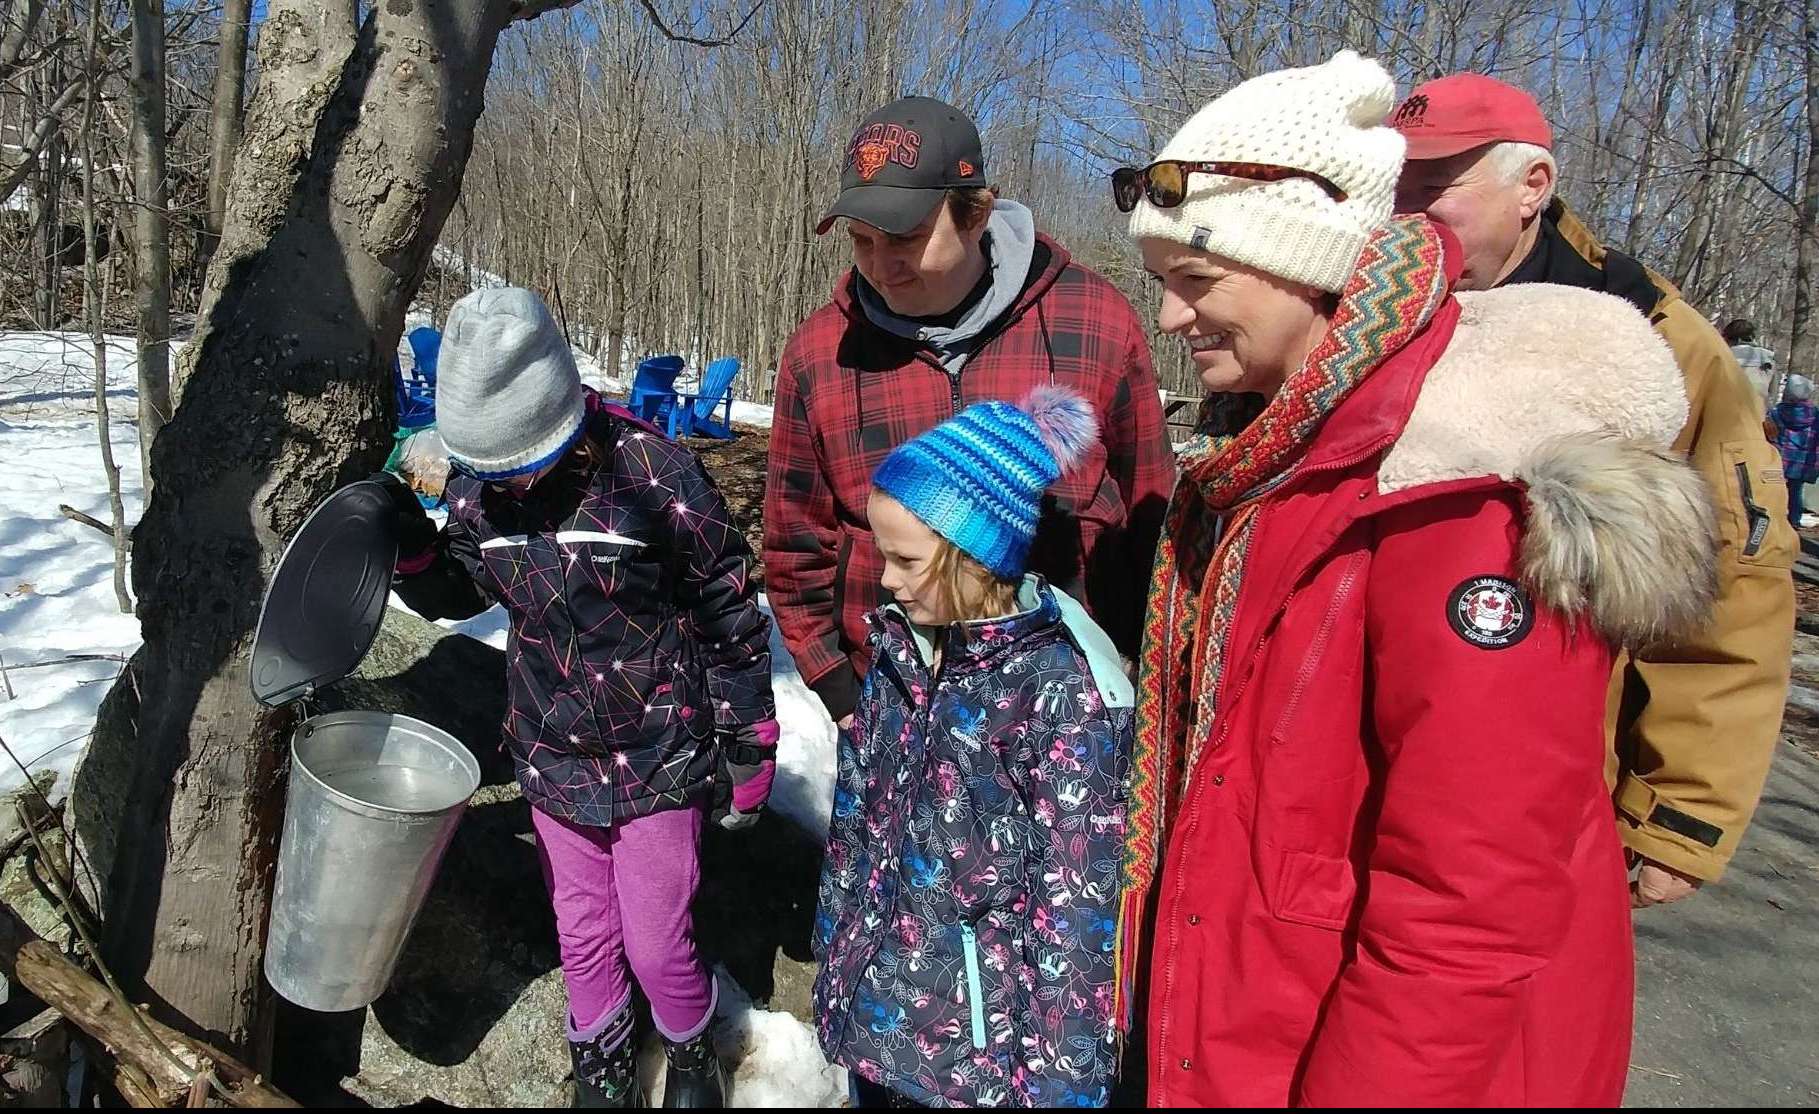 Family at Maple Sugar Shack looking at sap collection buckets on maple tree